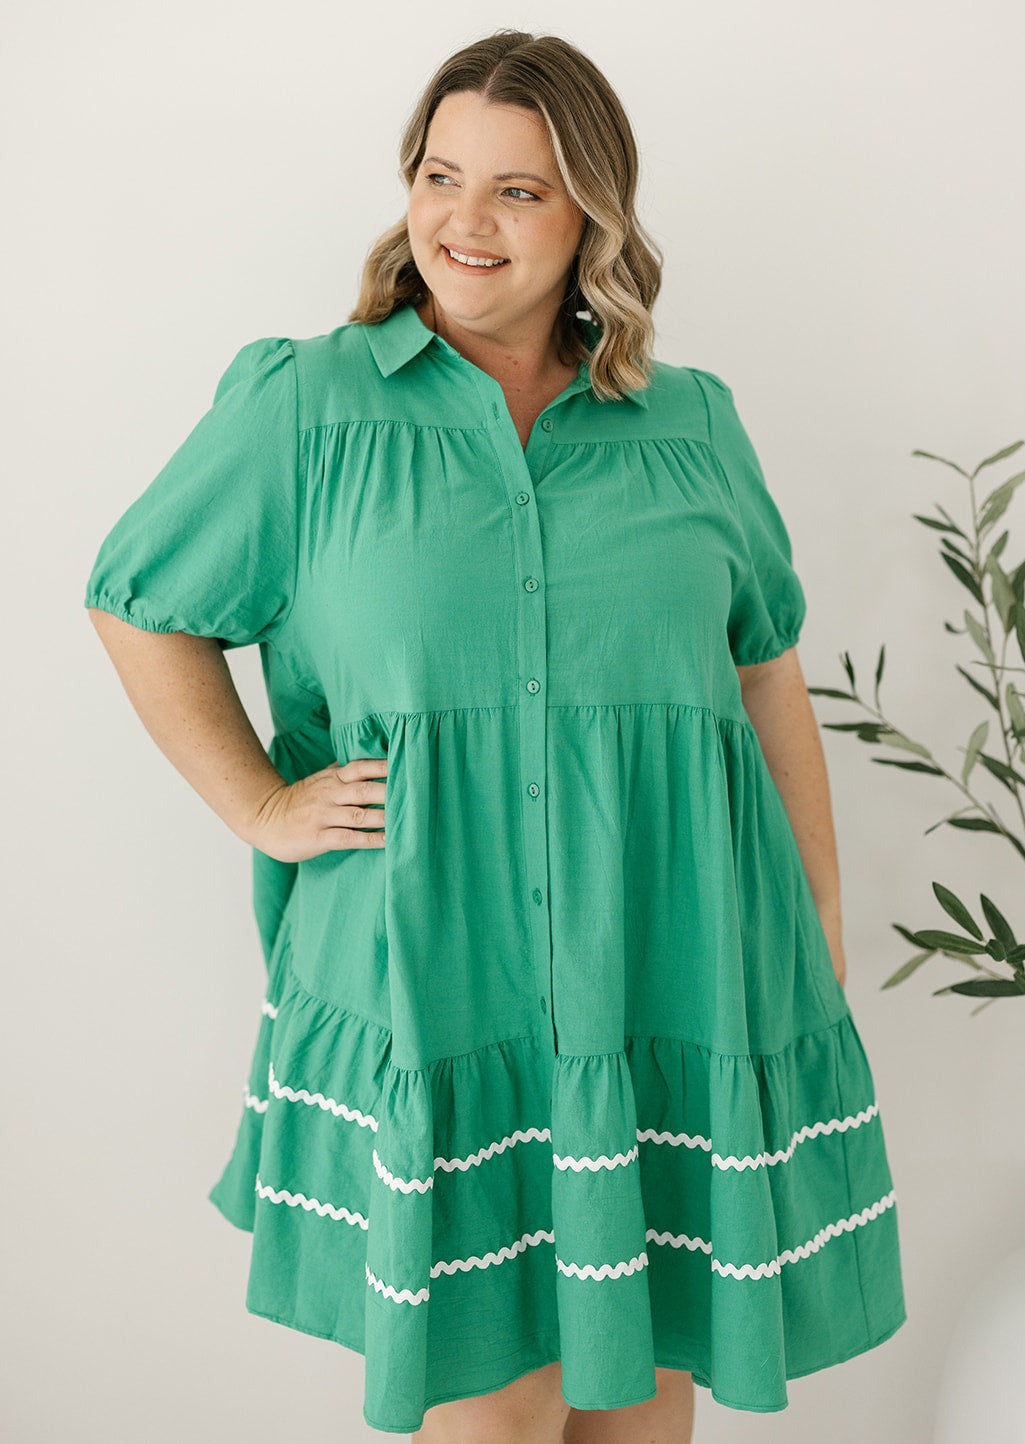 post-partum friendly button-down shirt-dress with pockets